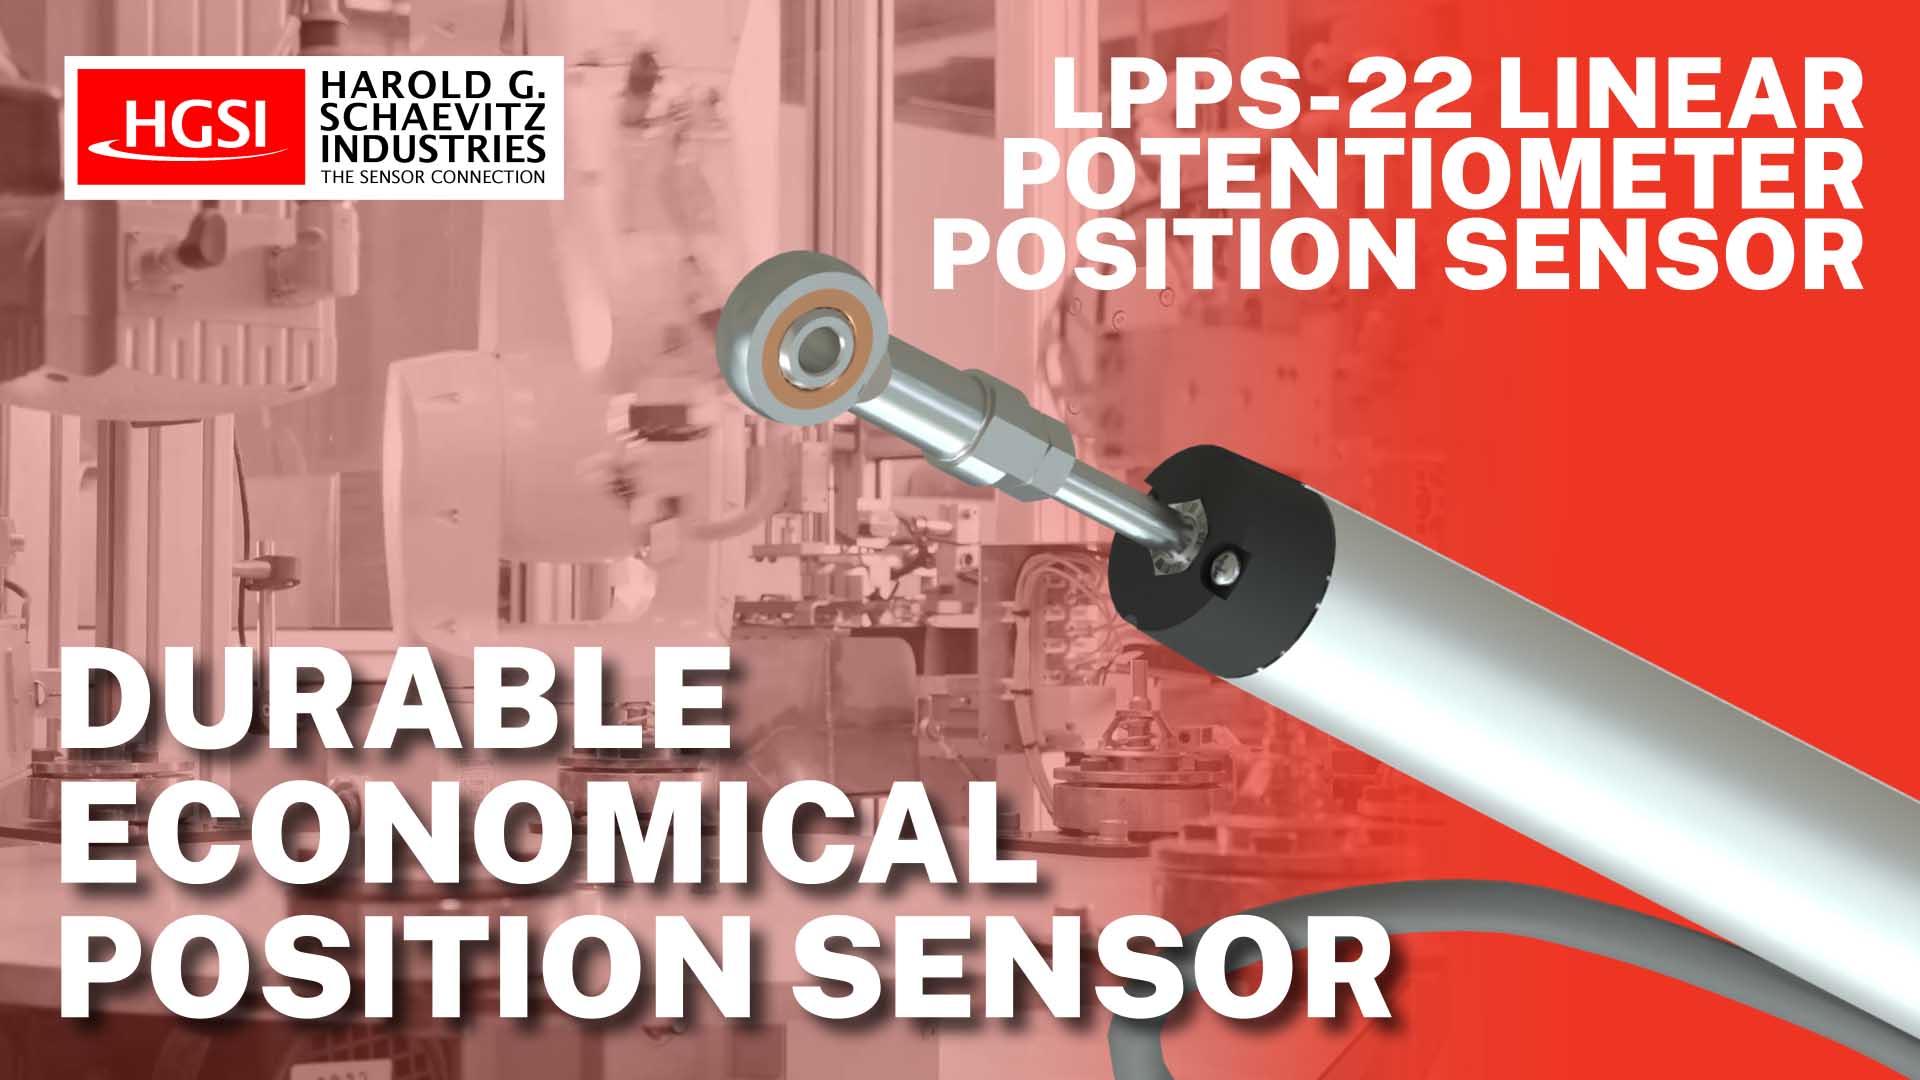 Overview of LPPS-22 Series Linear Potentiometer Position Sensor